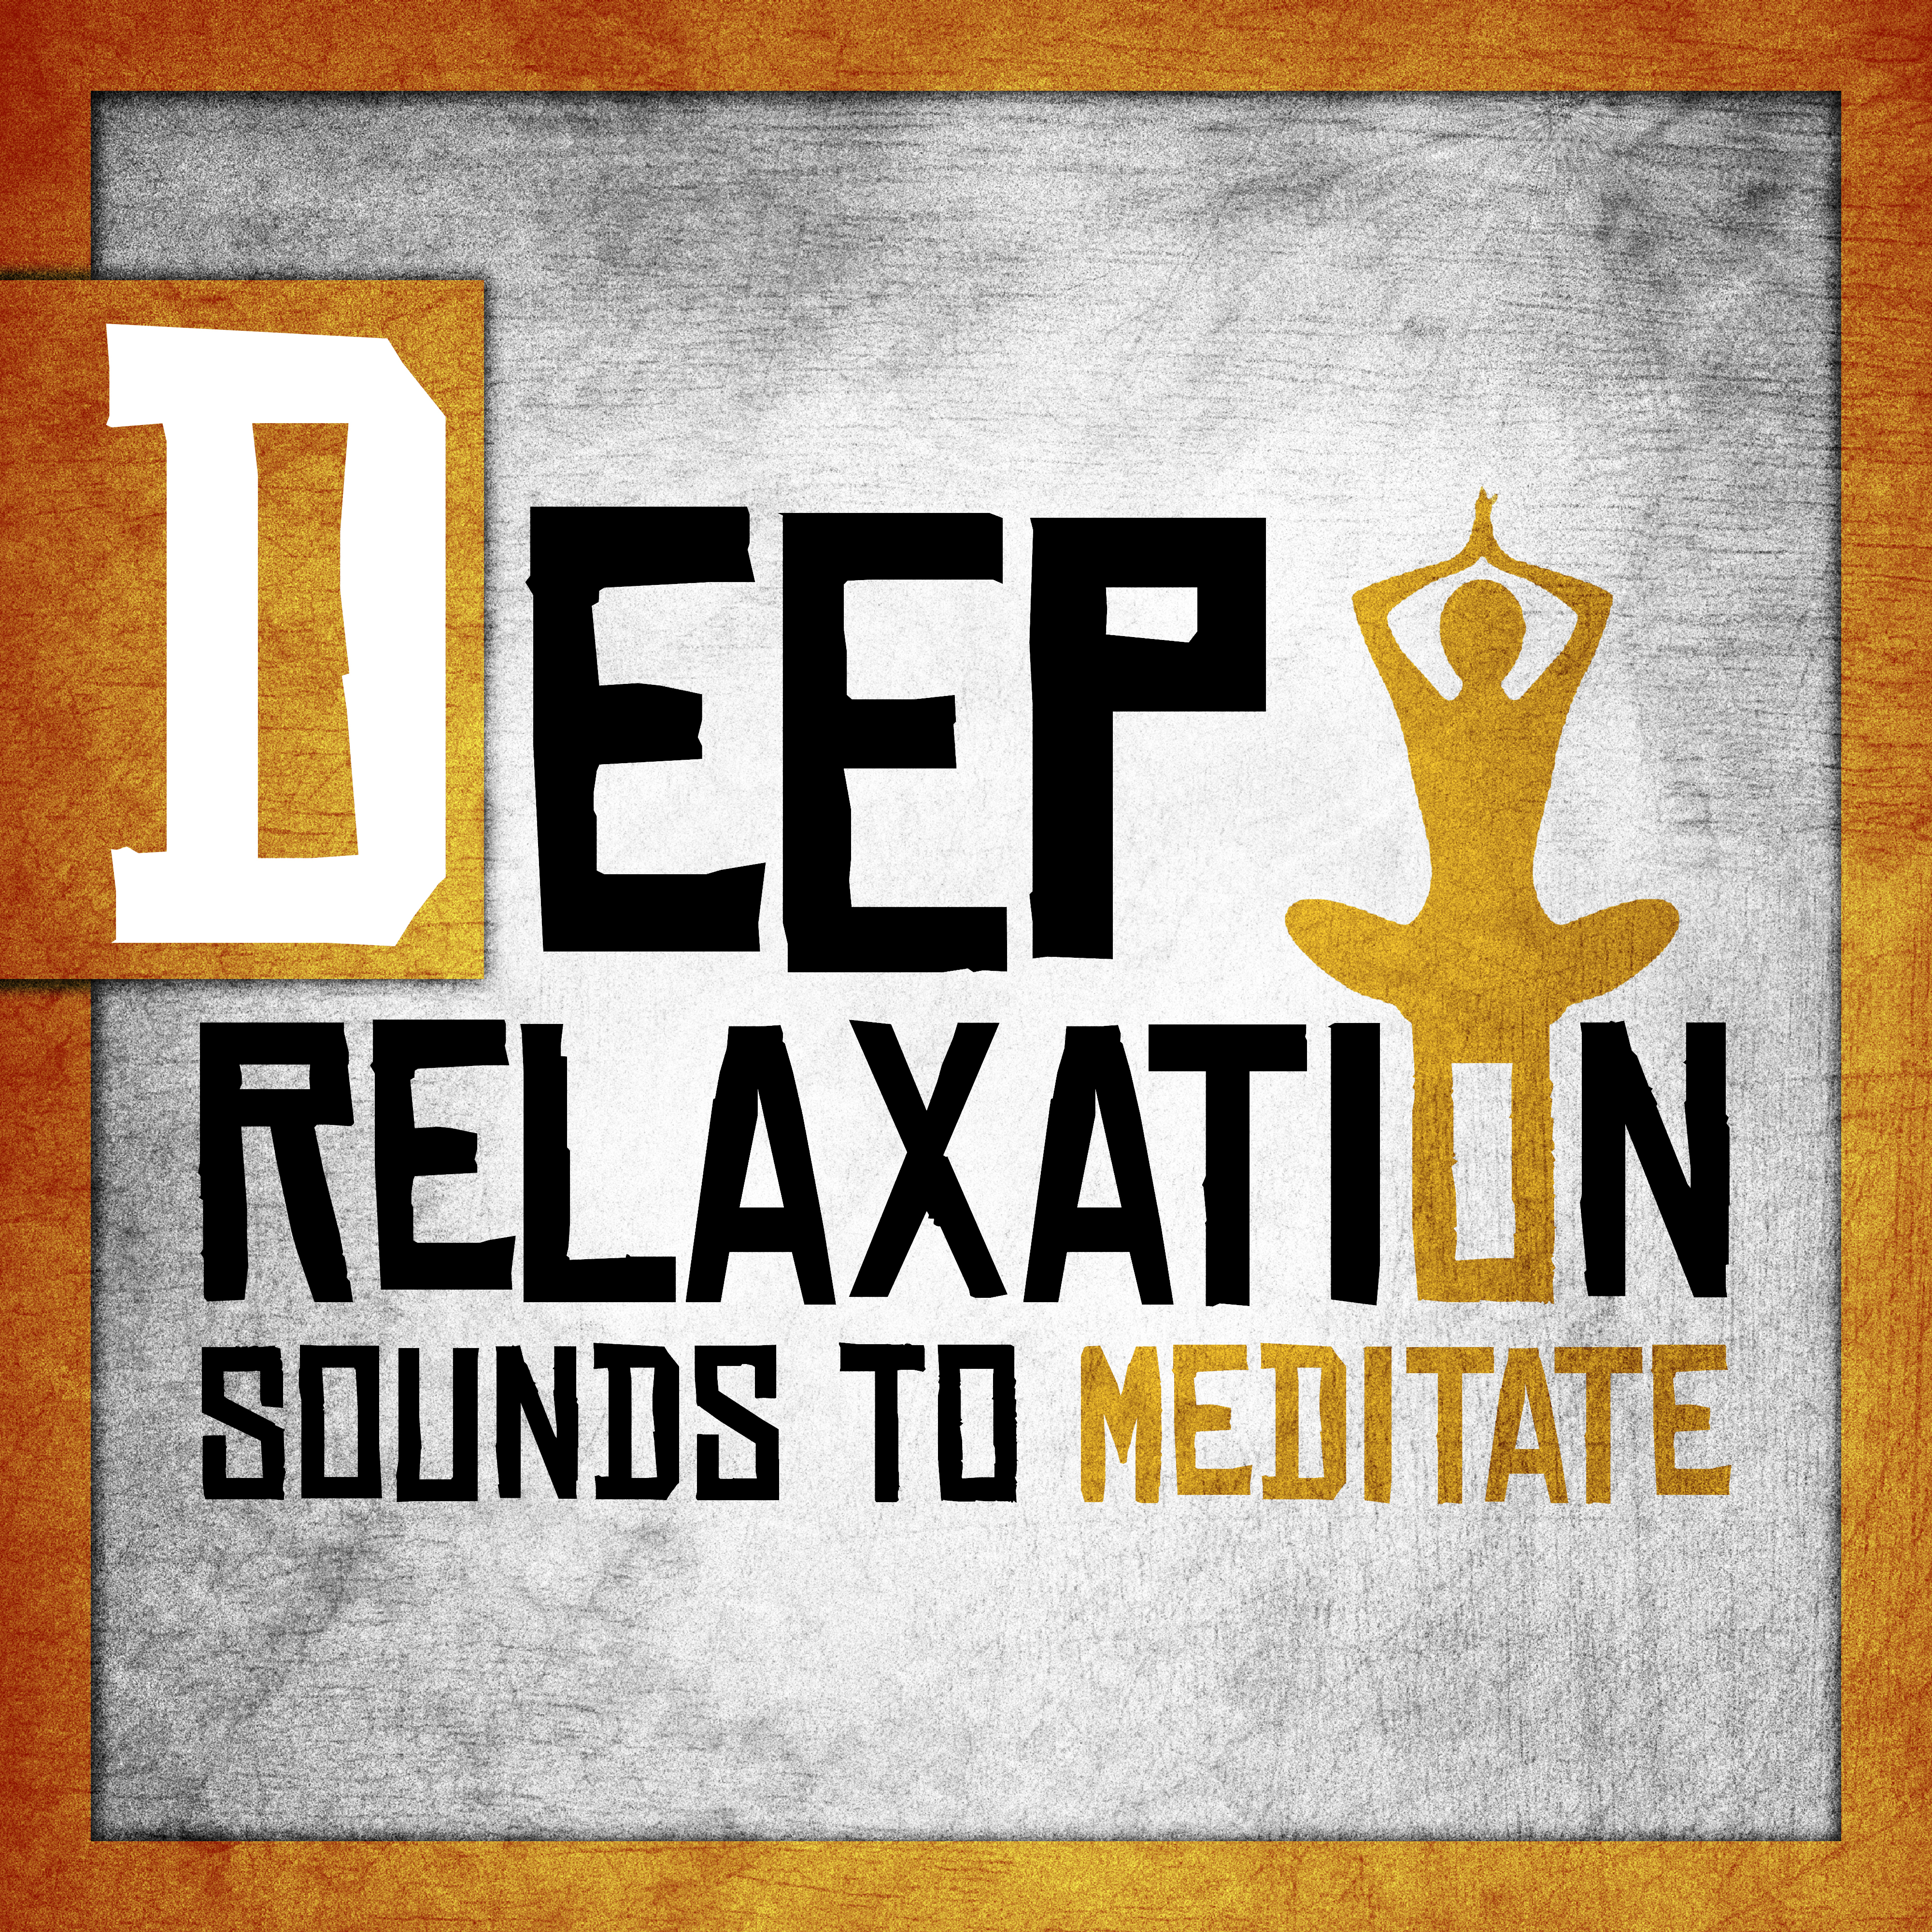 Deep Relaxation Sounds to Meditate